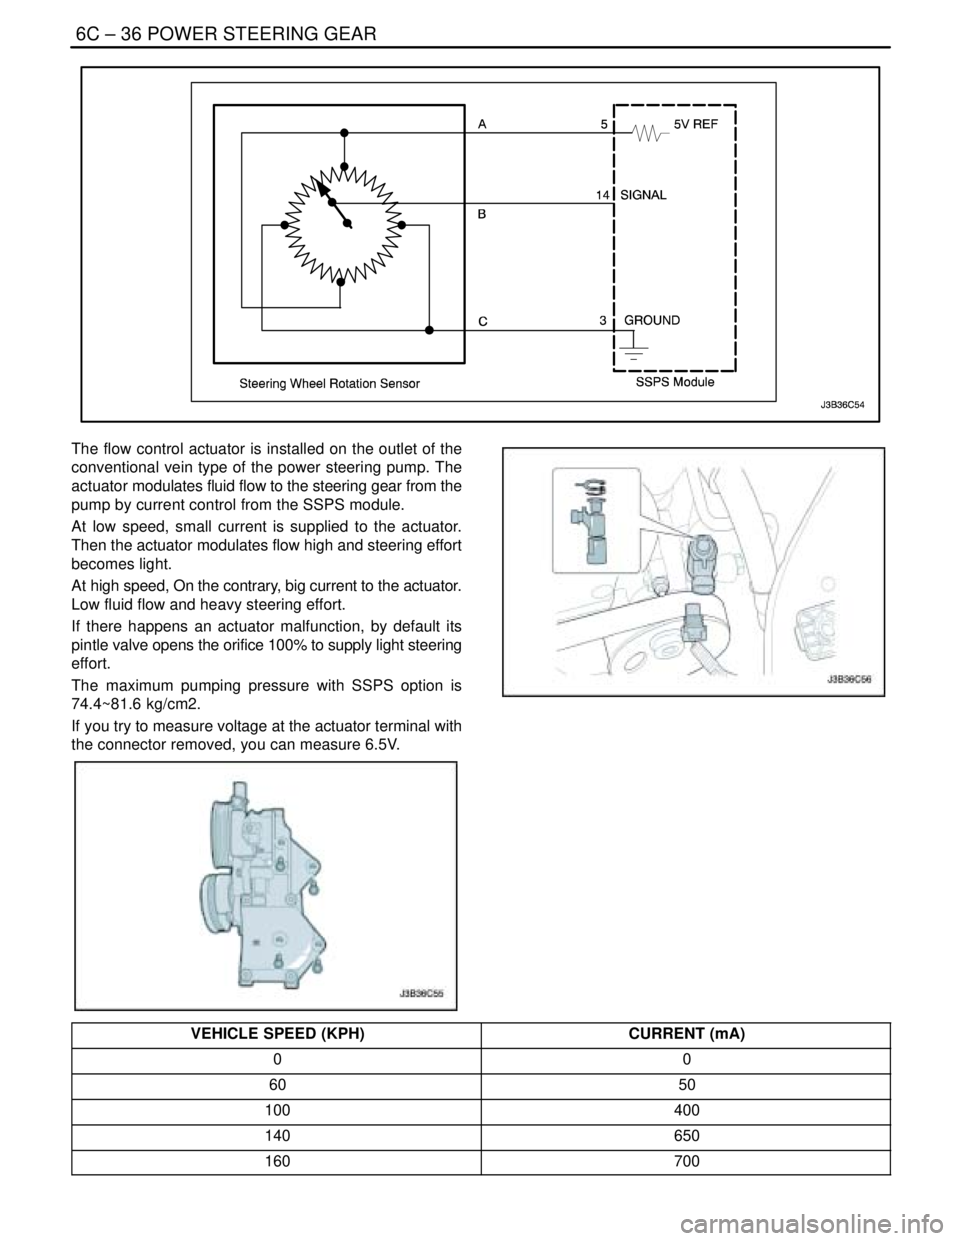 DAEWOO LACETTI 2004  Service Repair Manual 6C – 36IPOWER STEERING GEAR
DAEWOO V–121 BL4
The flow control actuator is installed on the outlet of the
conventional vein type of the power steering pump. The
actuator modulates fluid flow to the